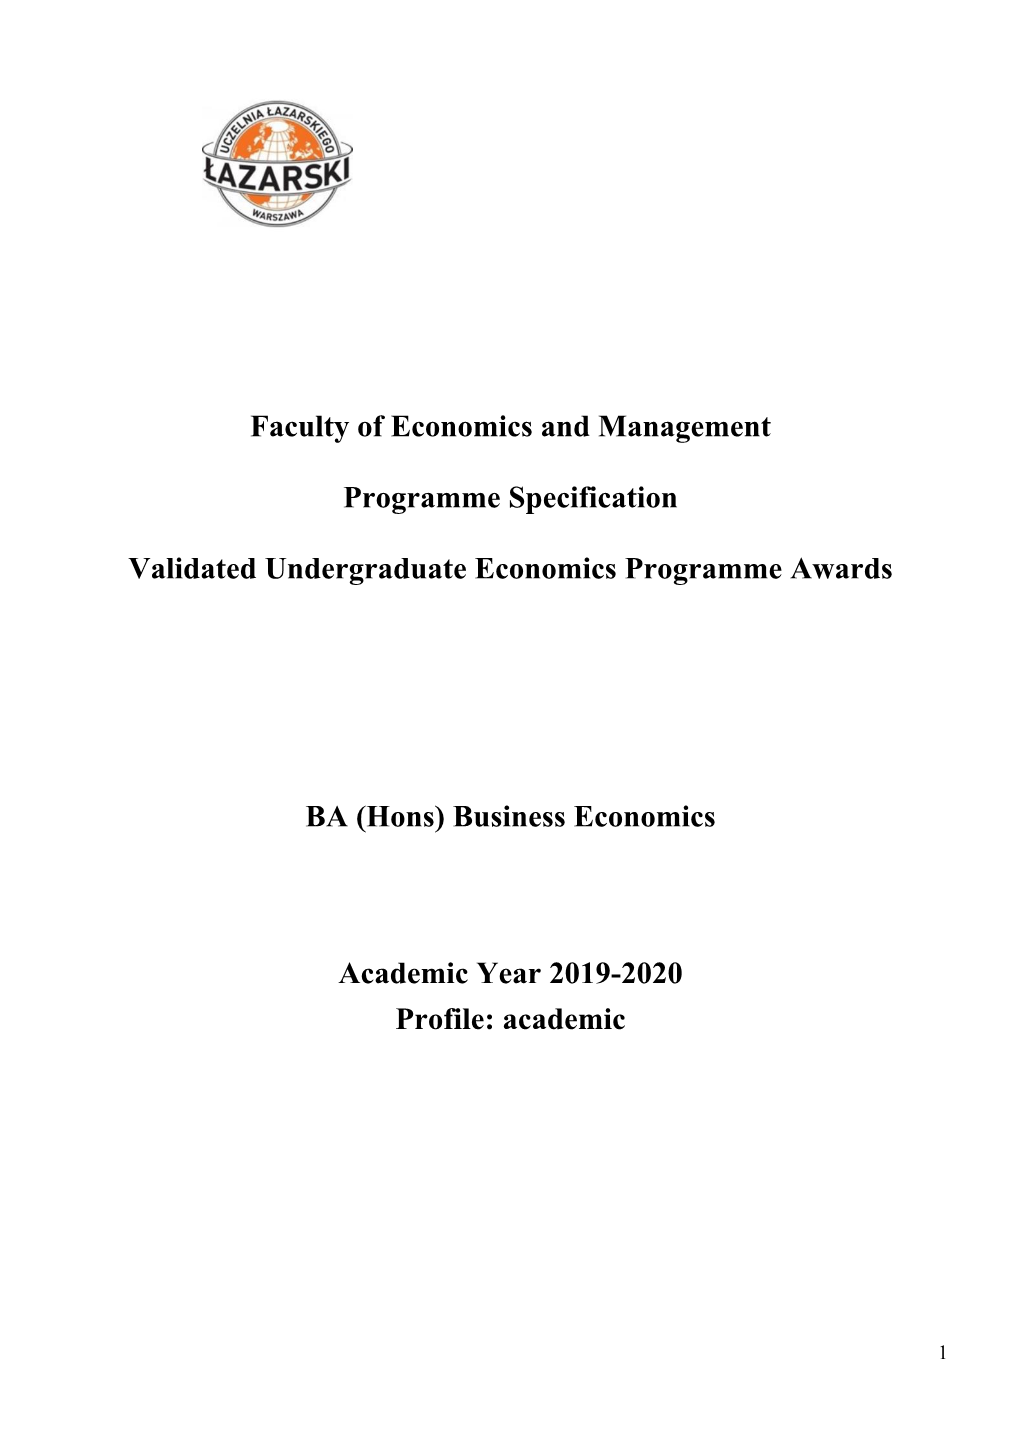 Faculty of Economics and Management Programme